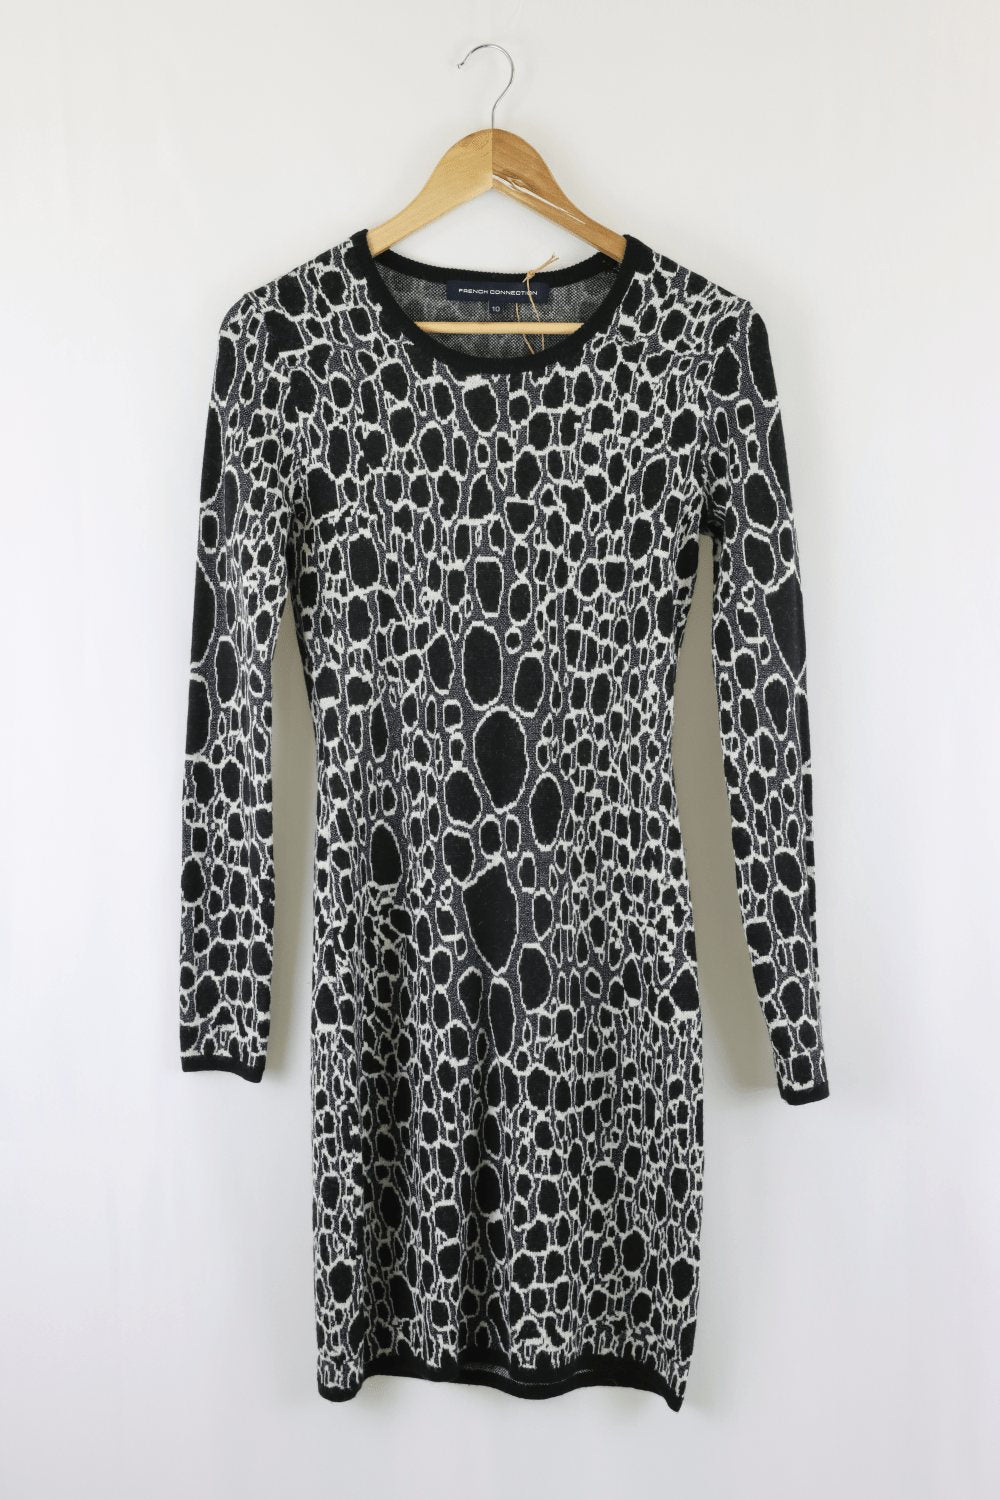 French Connections Black And White Pattern Dress 10